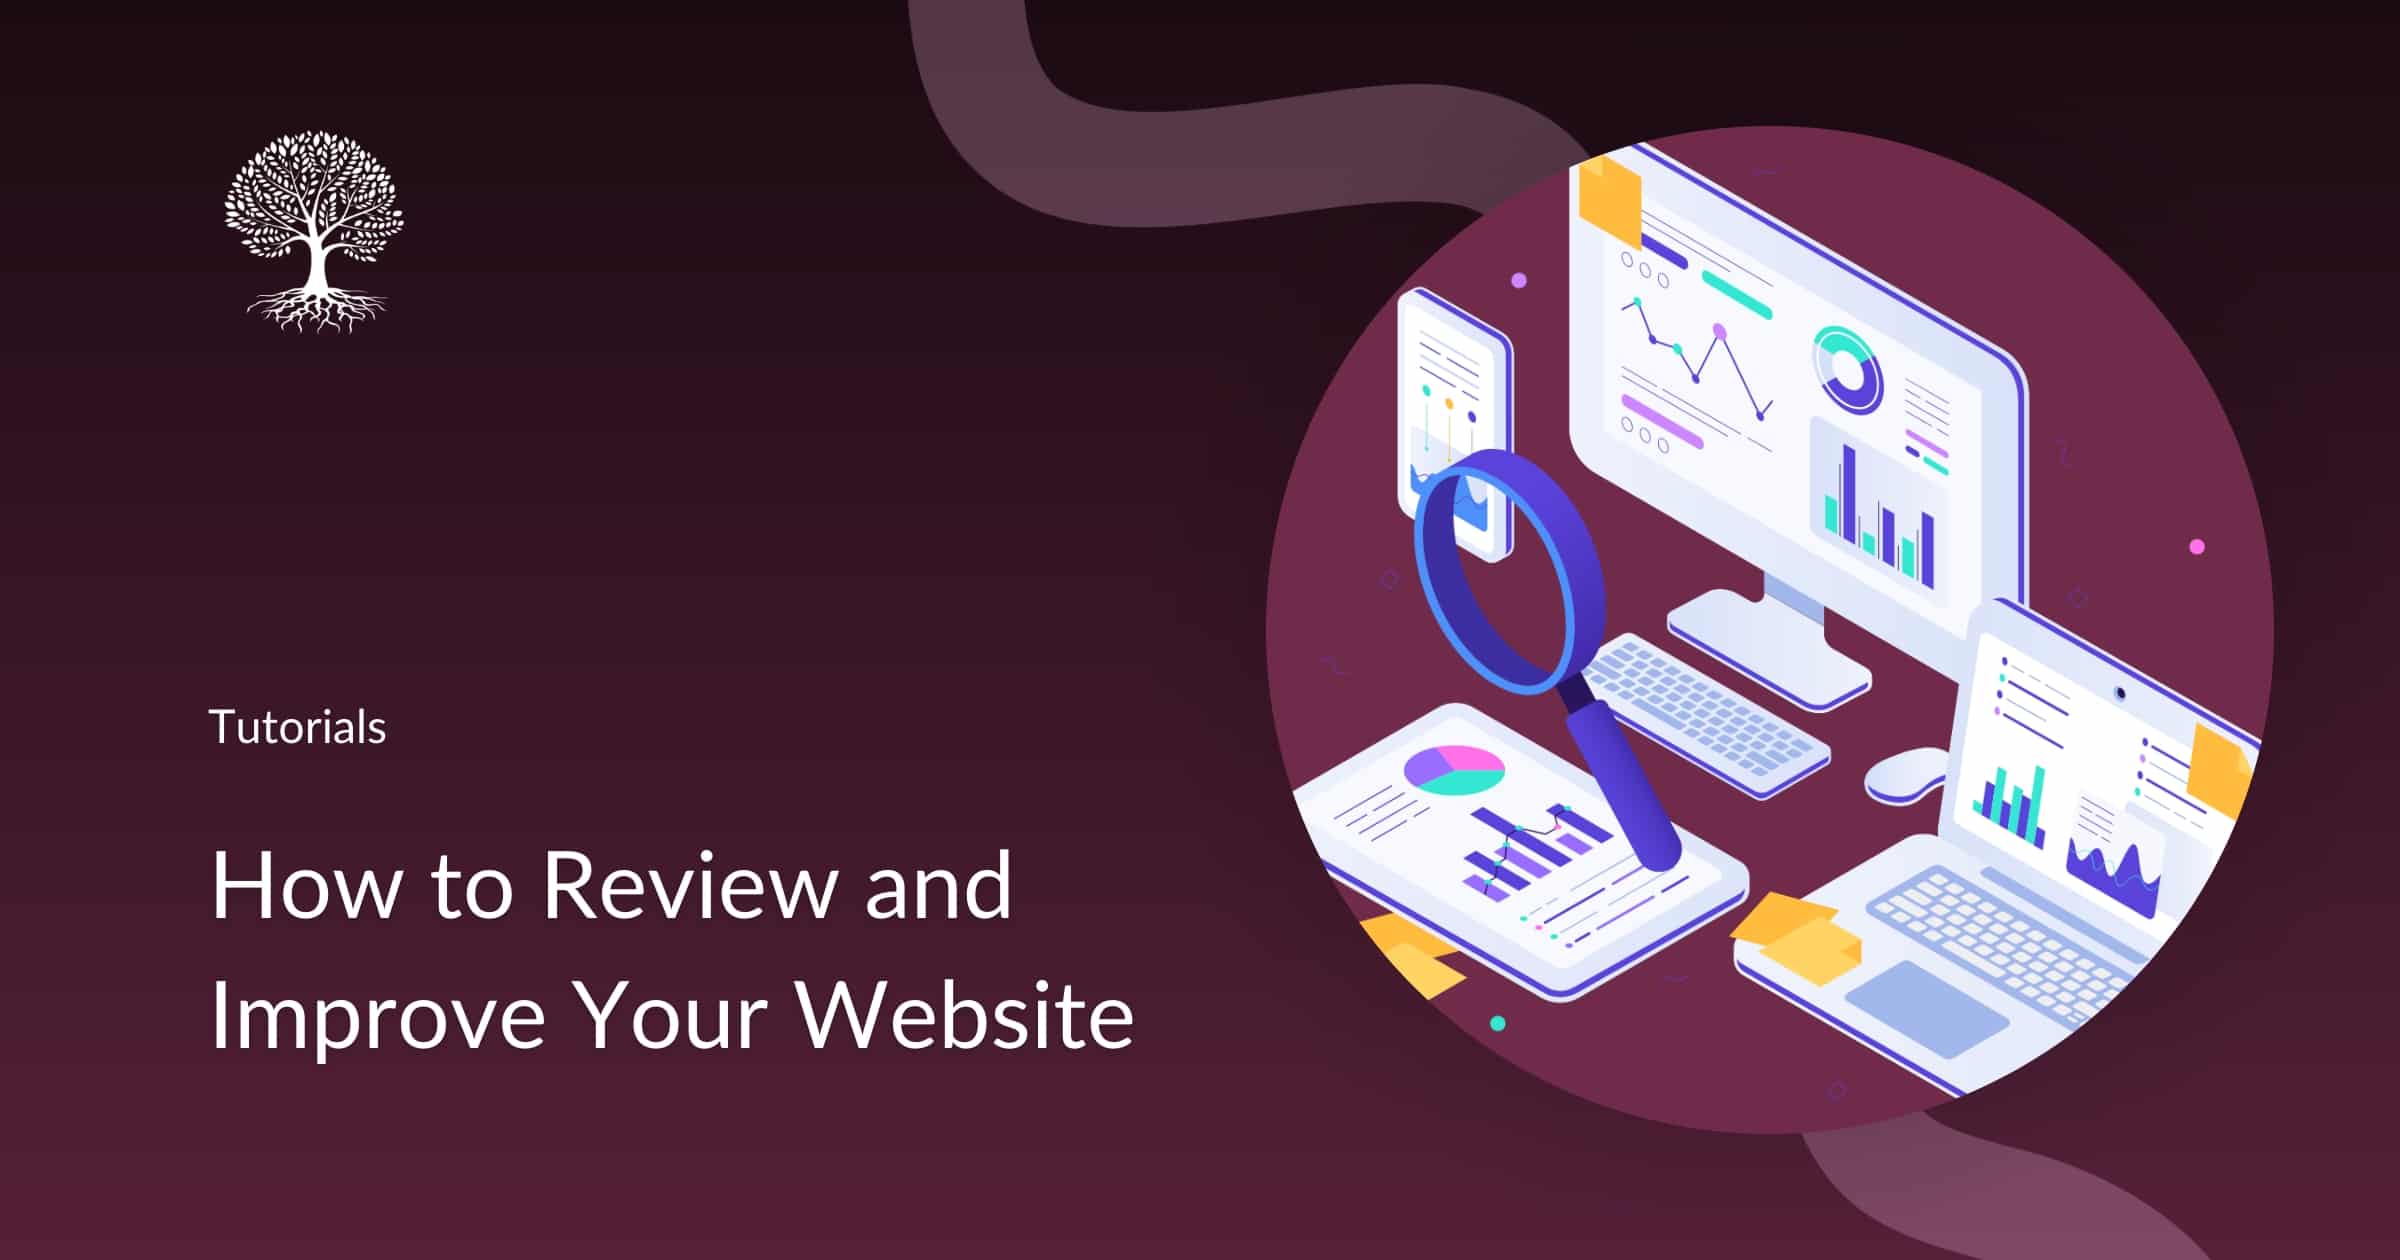 Website Review 101: How to Improve Your Website for Higher Profits and Better User Experience